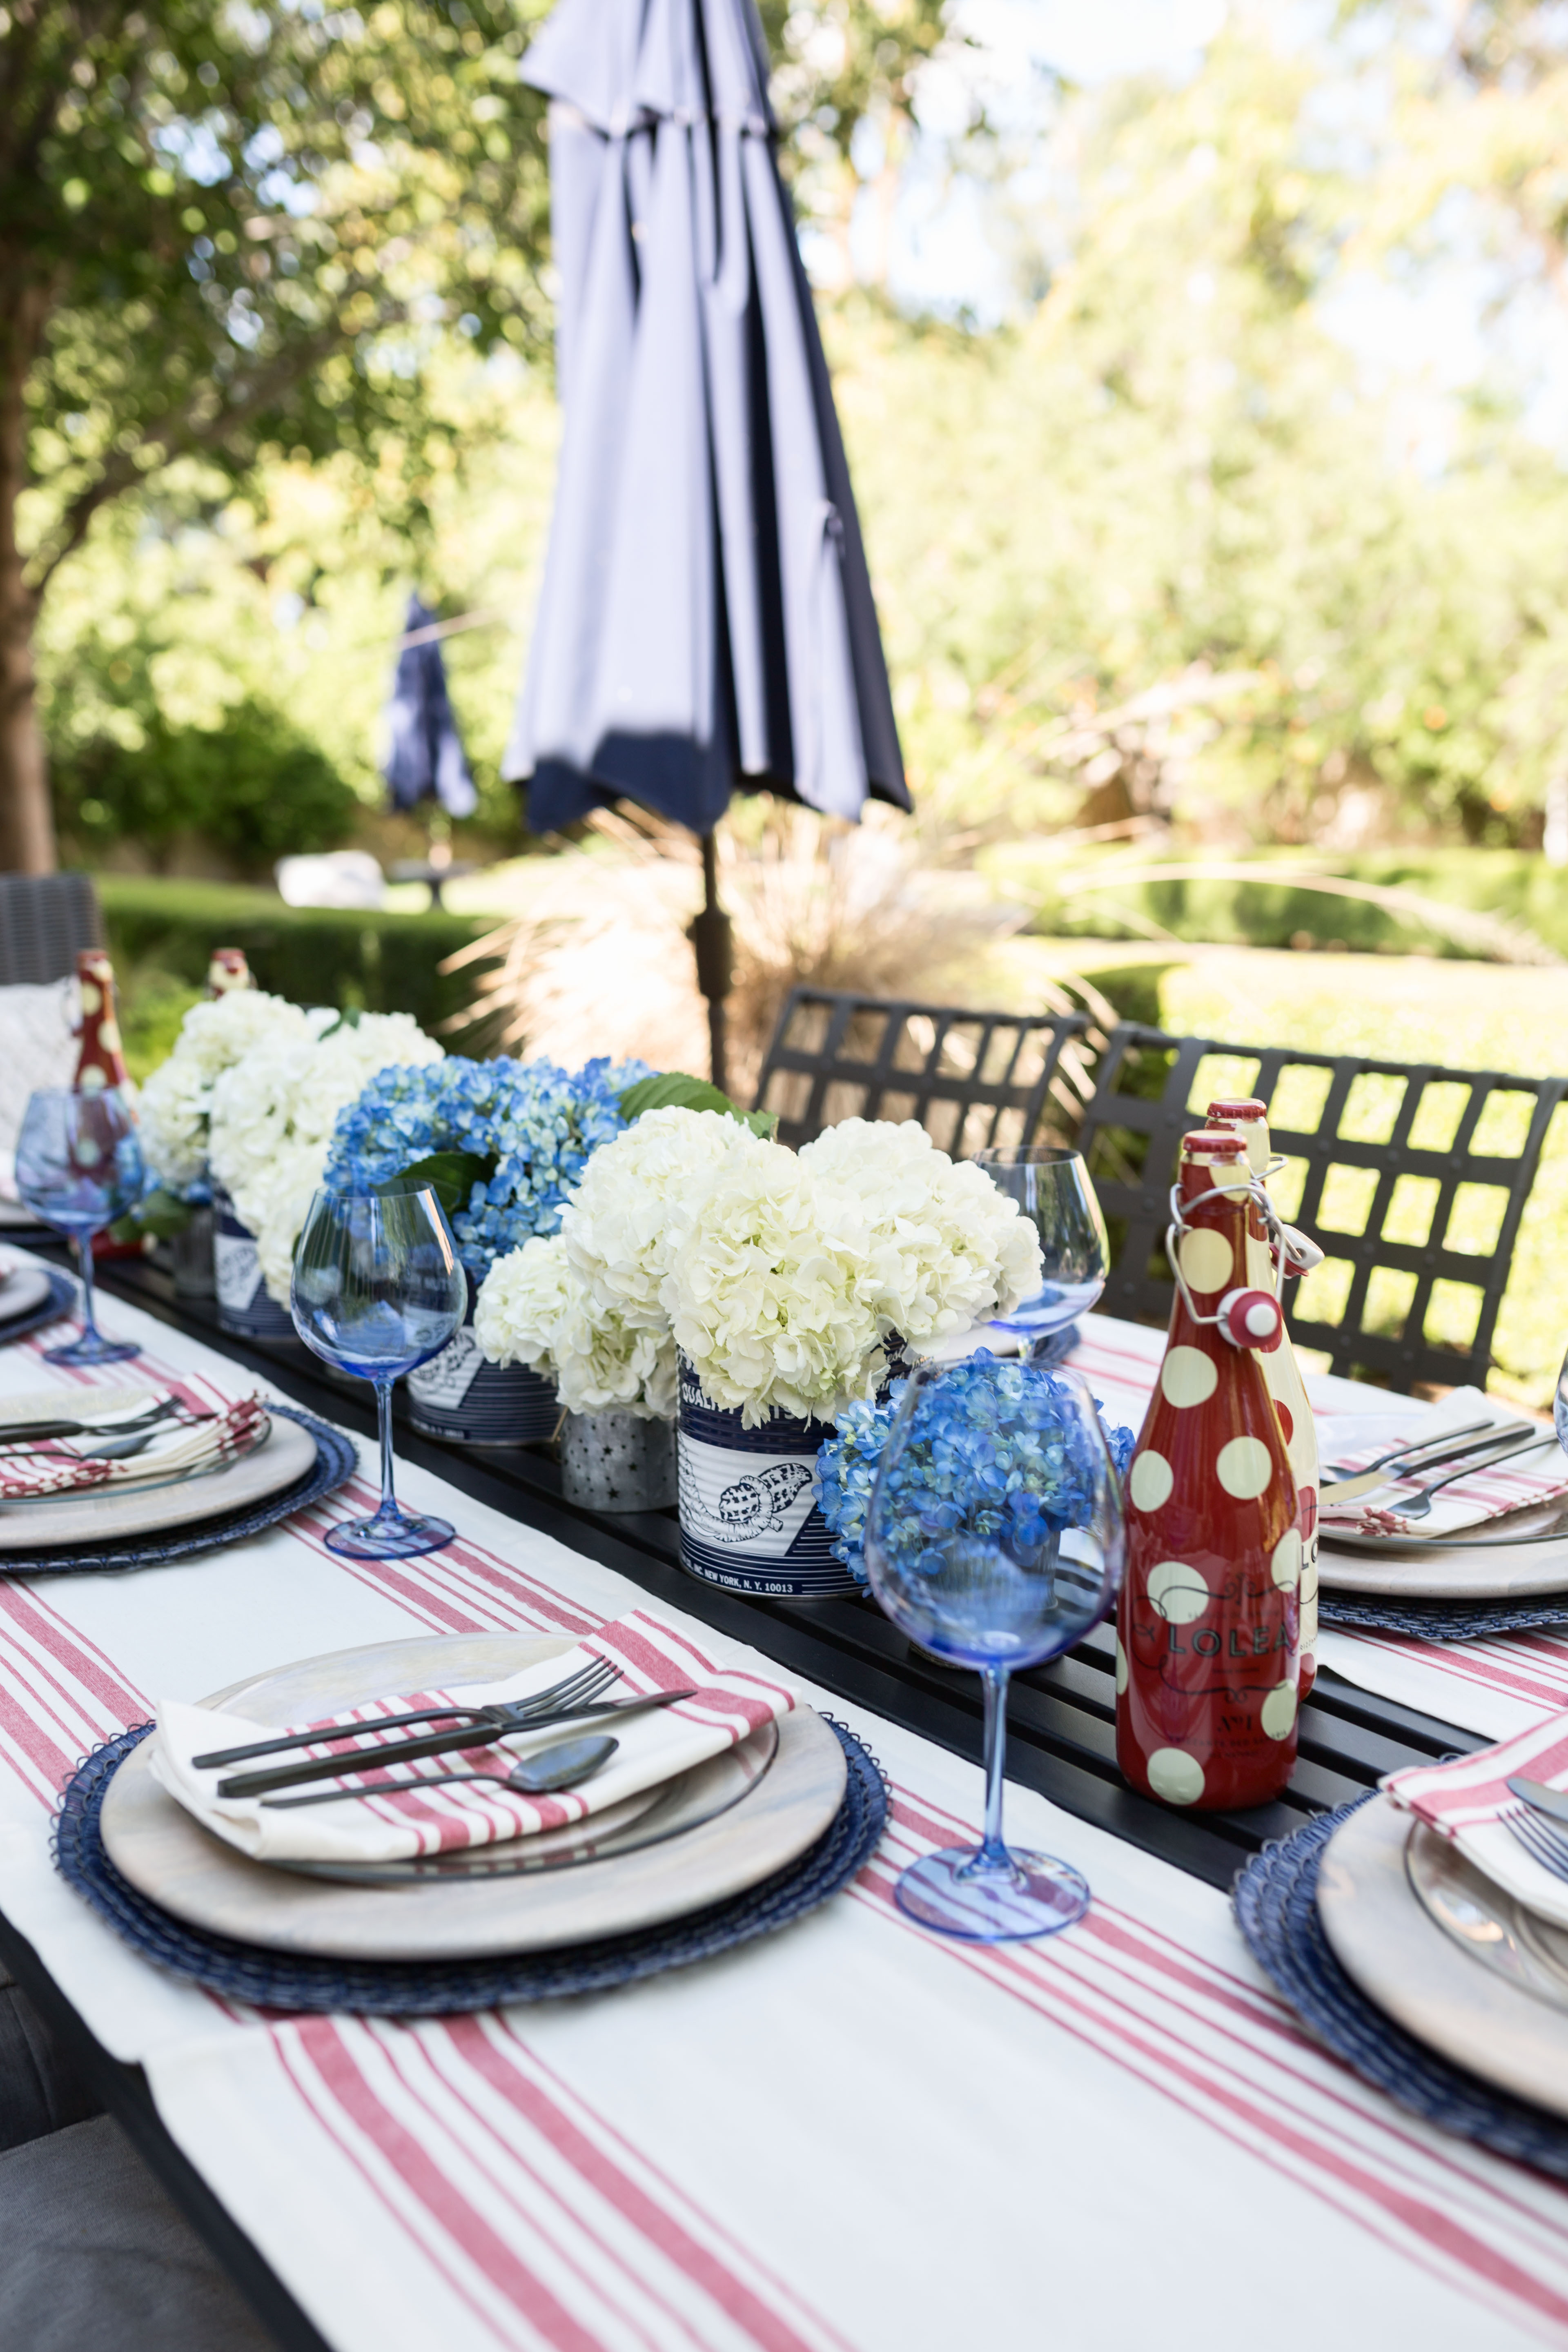 Holiday Hosting at Home #8: Patriotic Parties